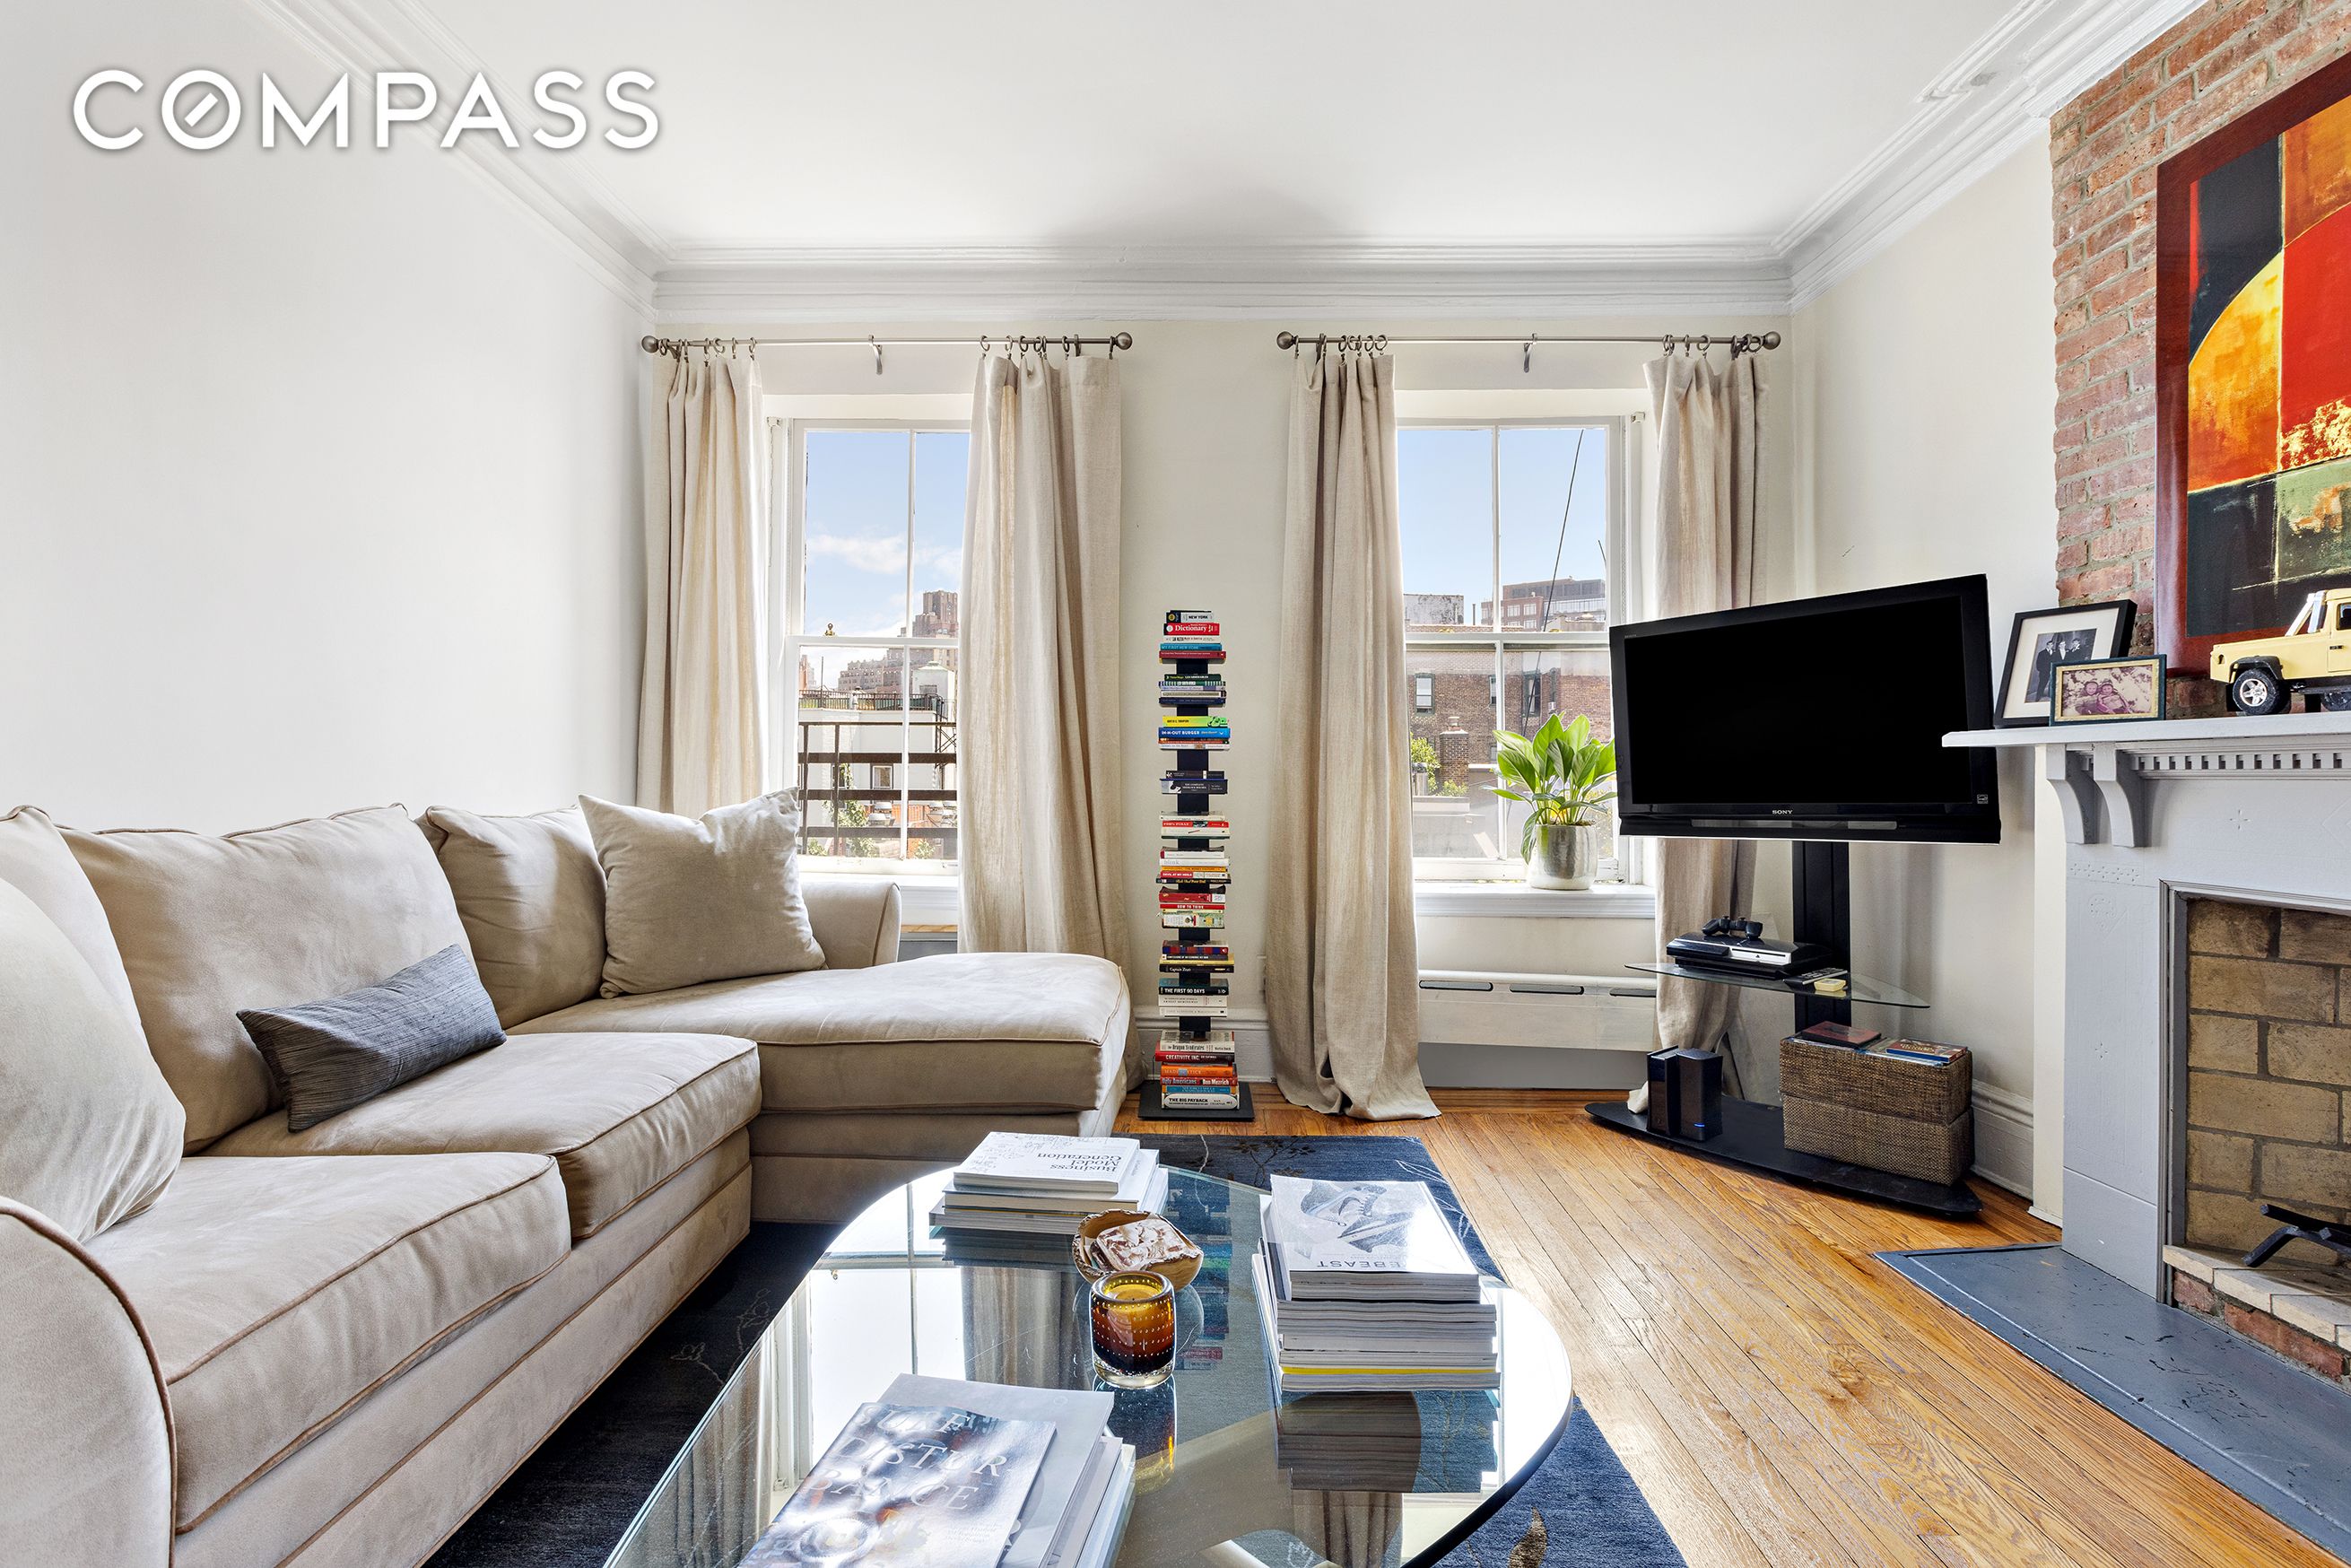 306 West 4th Street E3, West Village, Downtown, NYC - 1 Bedrooms  
1 Bathrooms  
4 Rooms - 